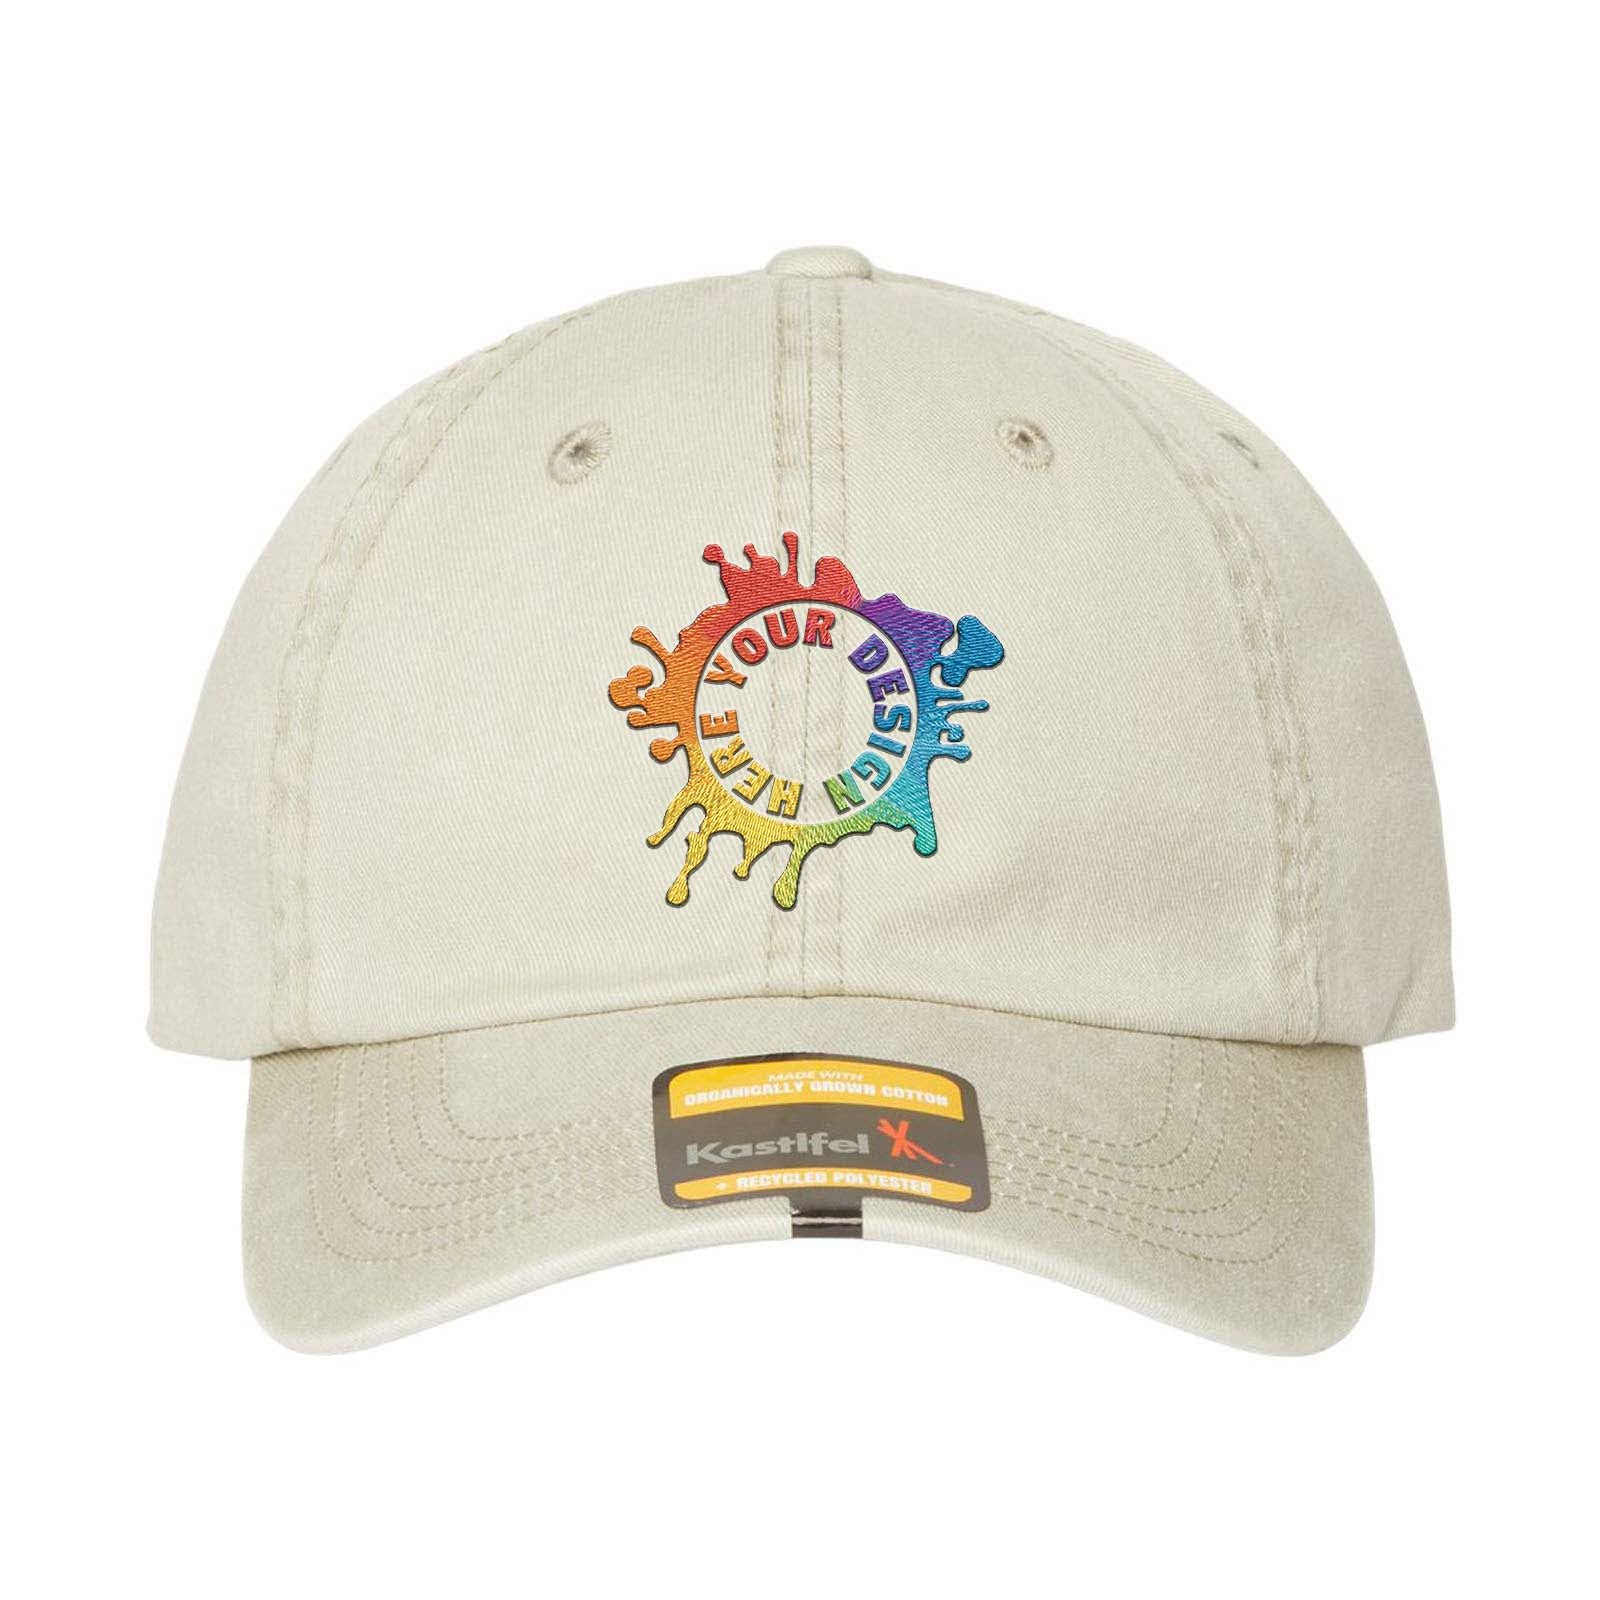 Embroidered Kastlfel Rooney Pigment Dyed Dad Hat - Mato & Hash